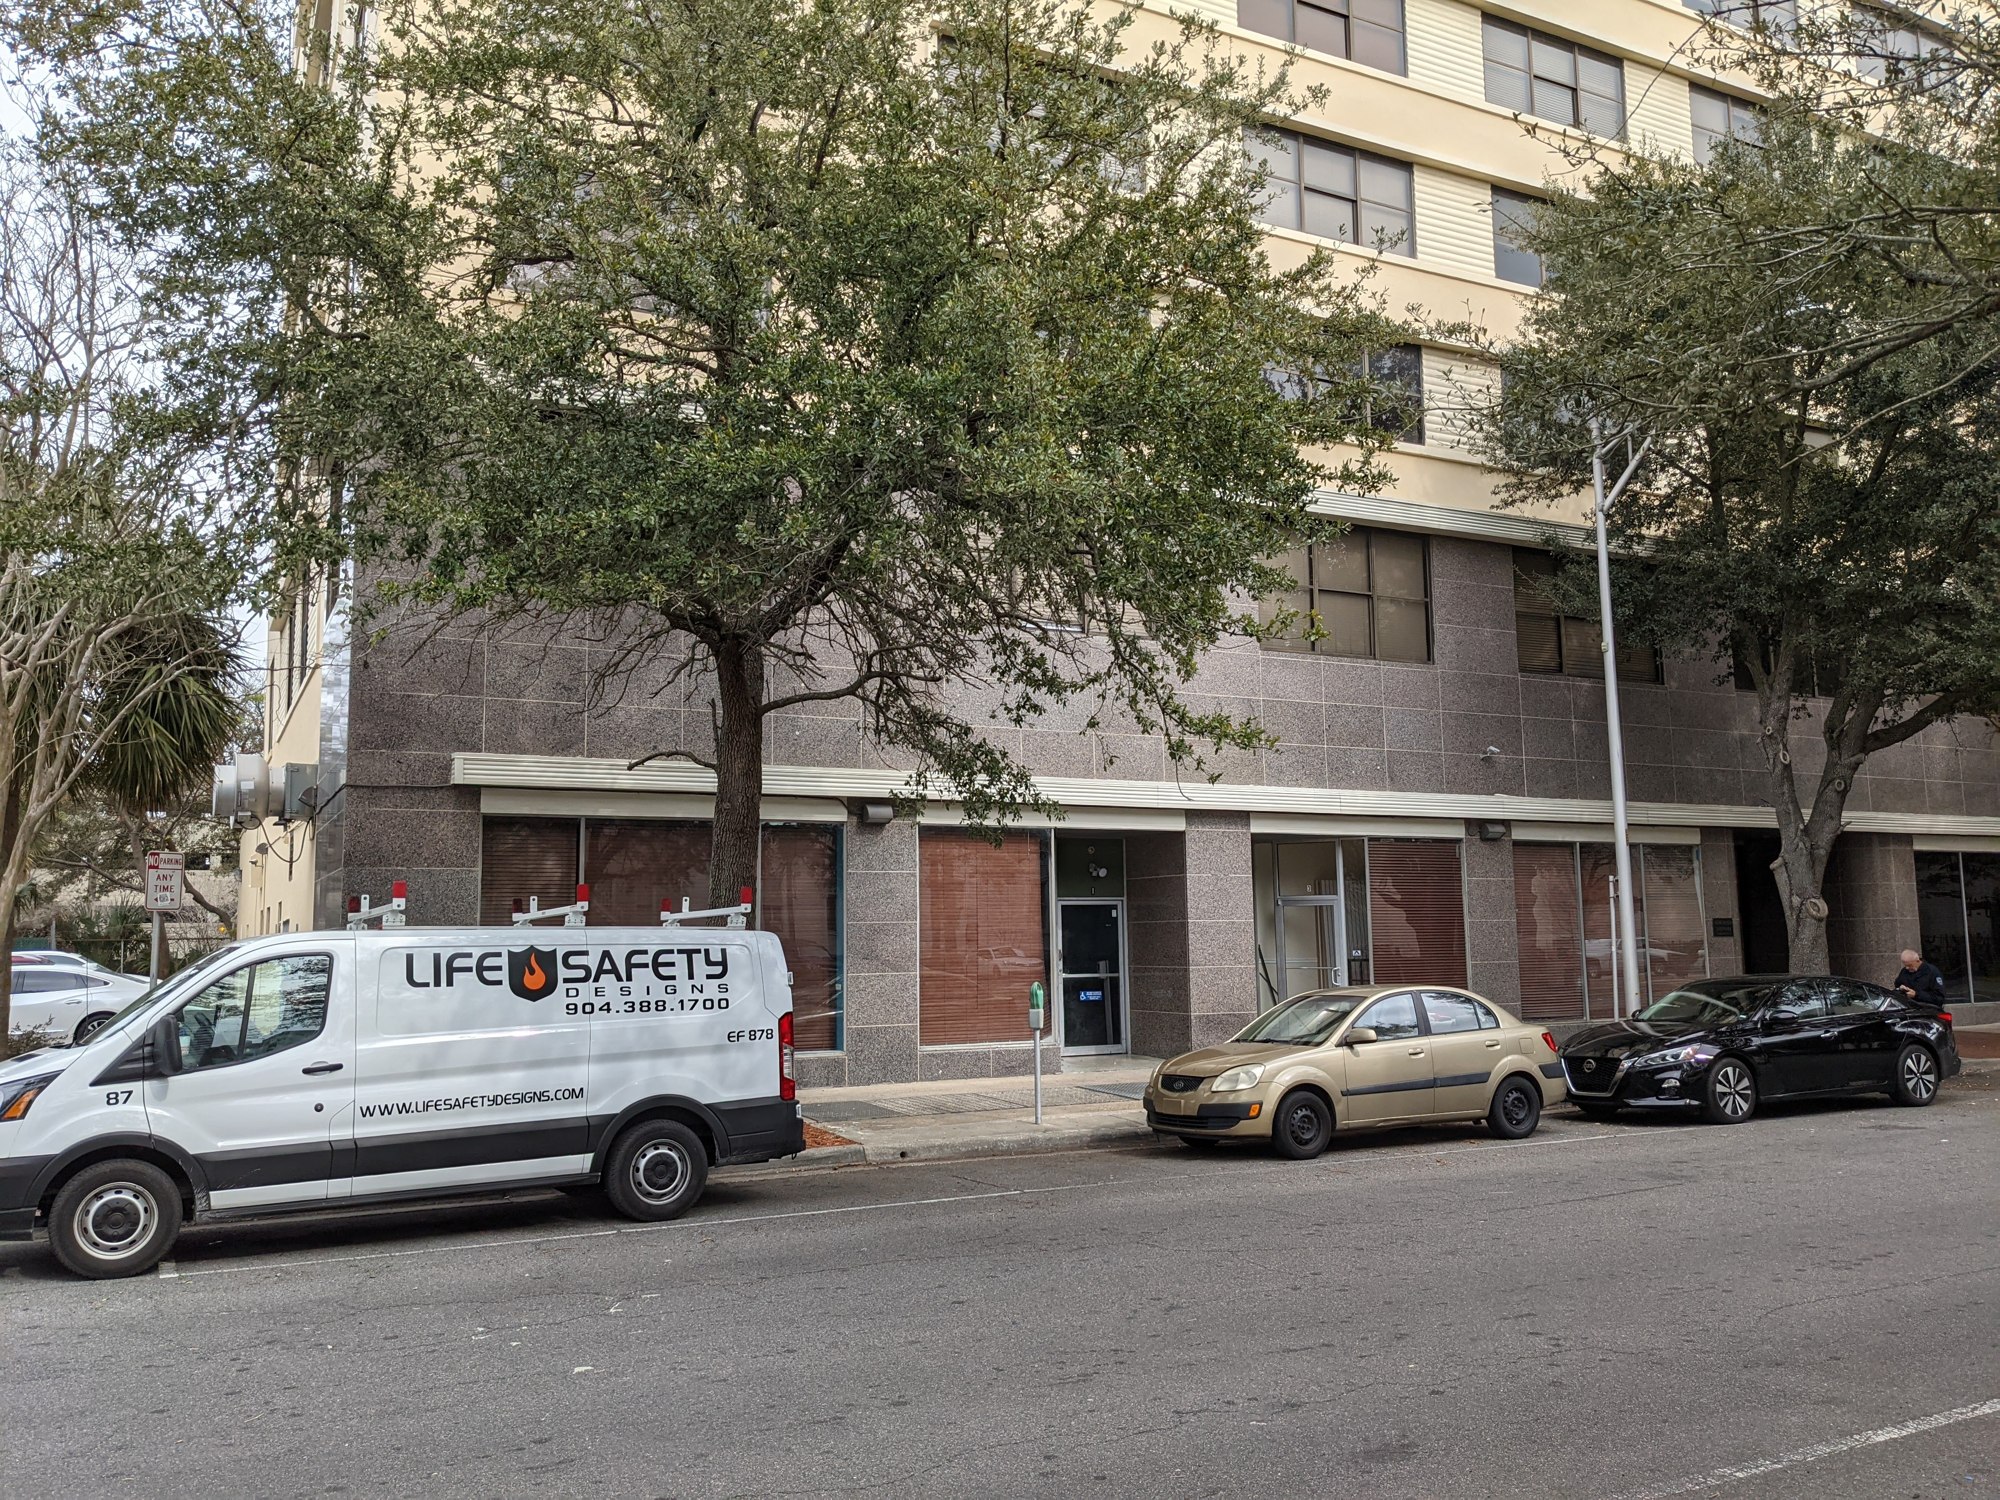 The Greedy Spoon is planned at 311 W. Ashley St., next to the former Grenville Kitchen space.